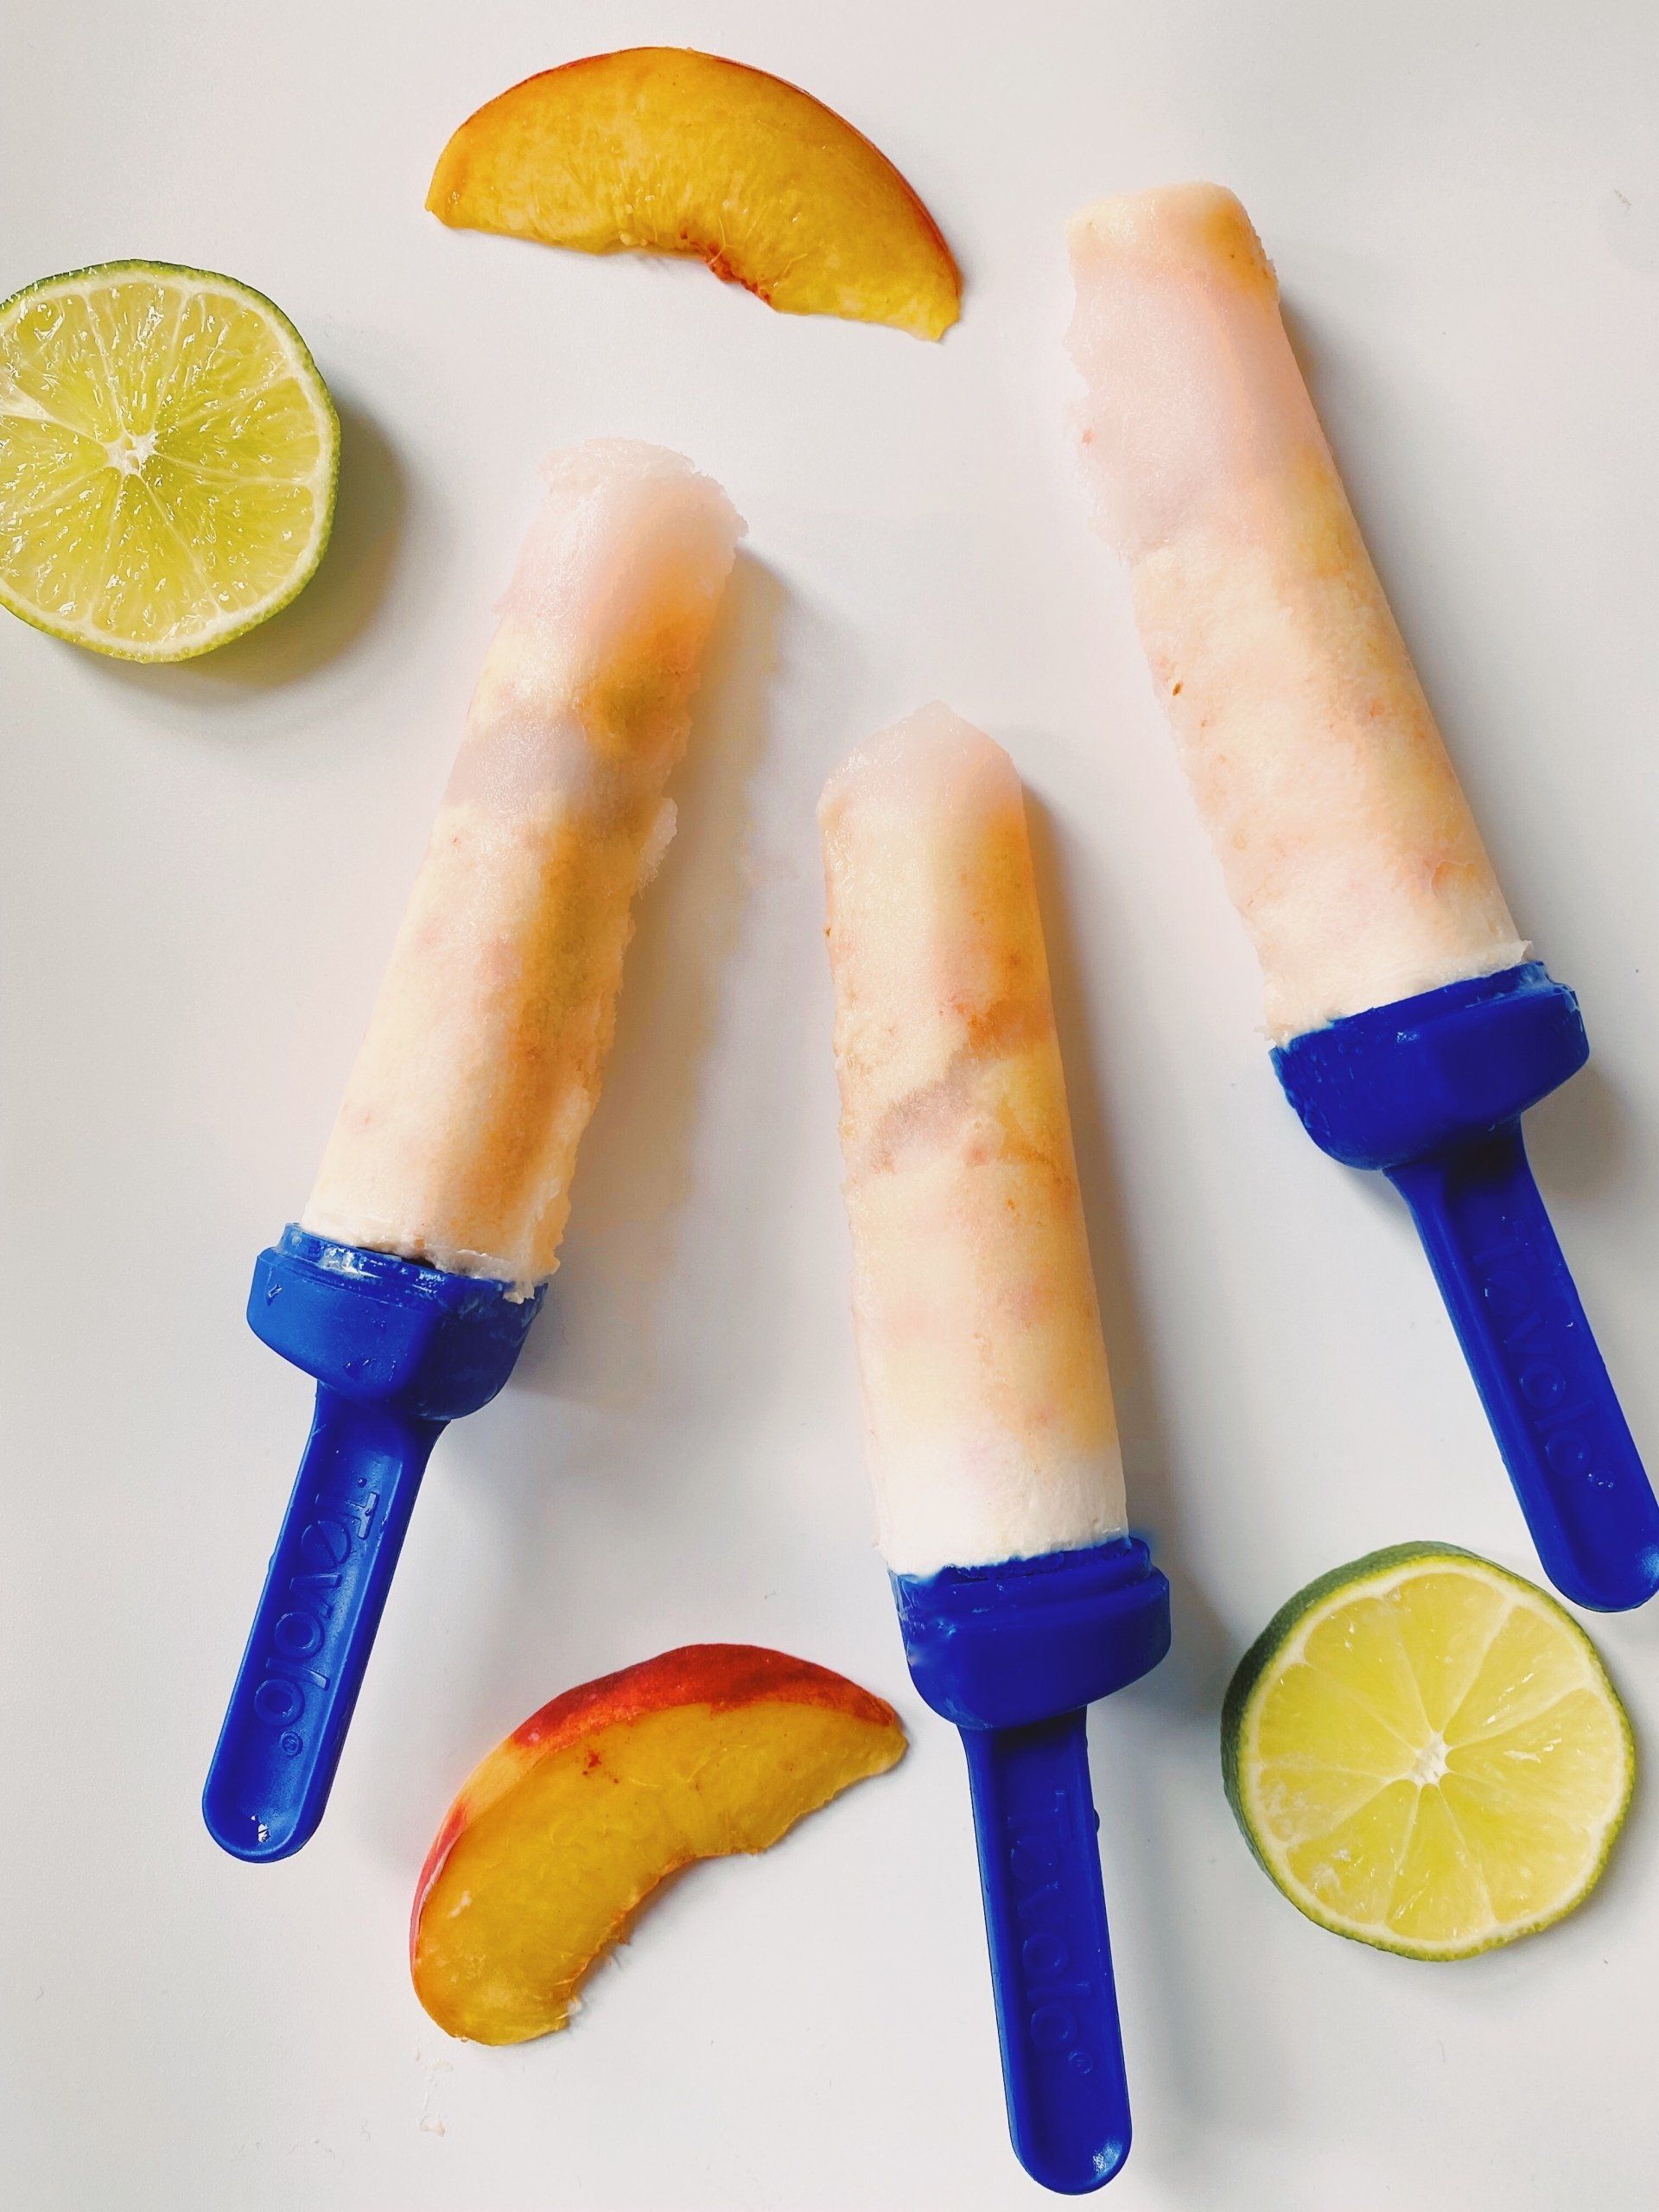 Peach popsicles with blue handles